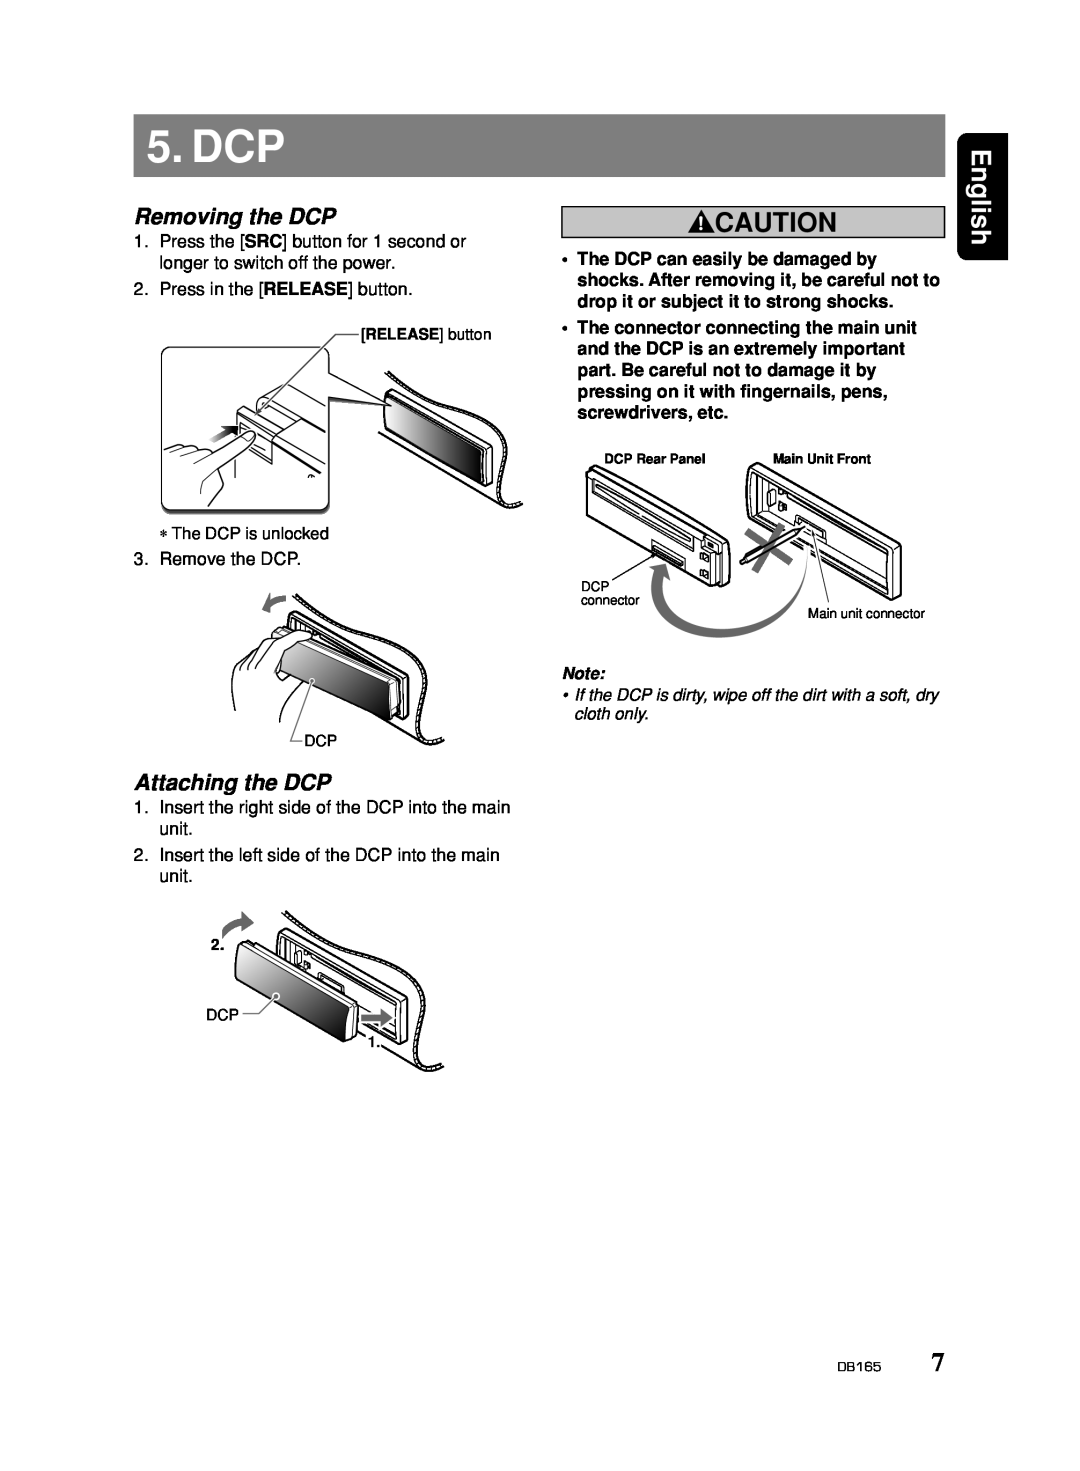 Clarion DB165 owner manual Dcp, Removing the DCP, Attaching the DCP, English 